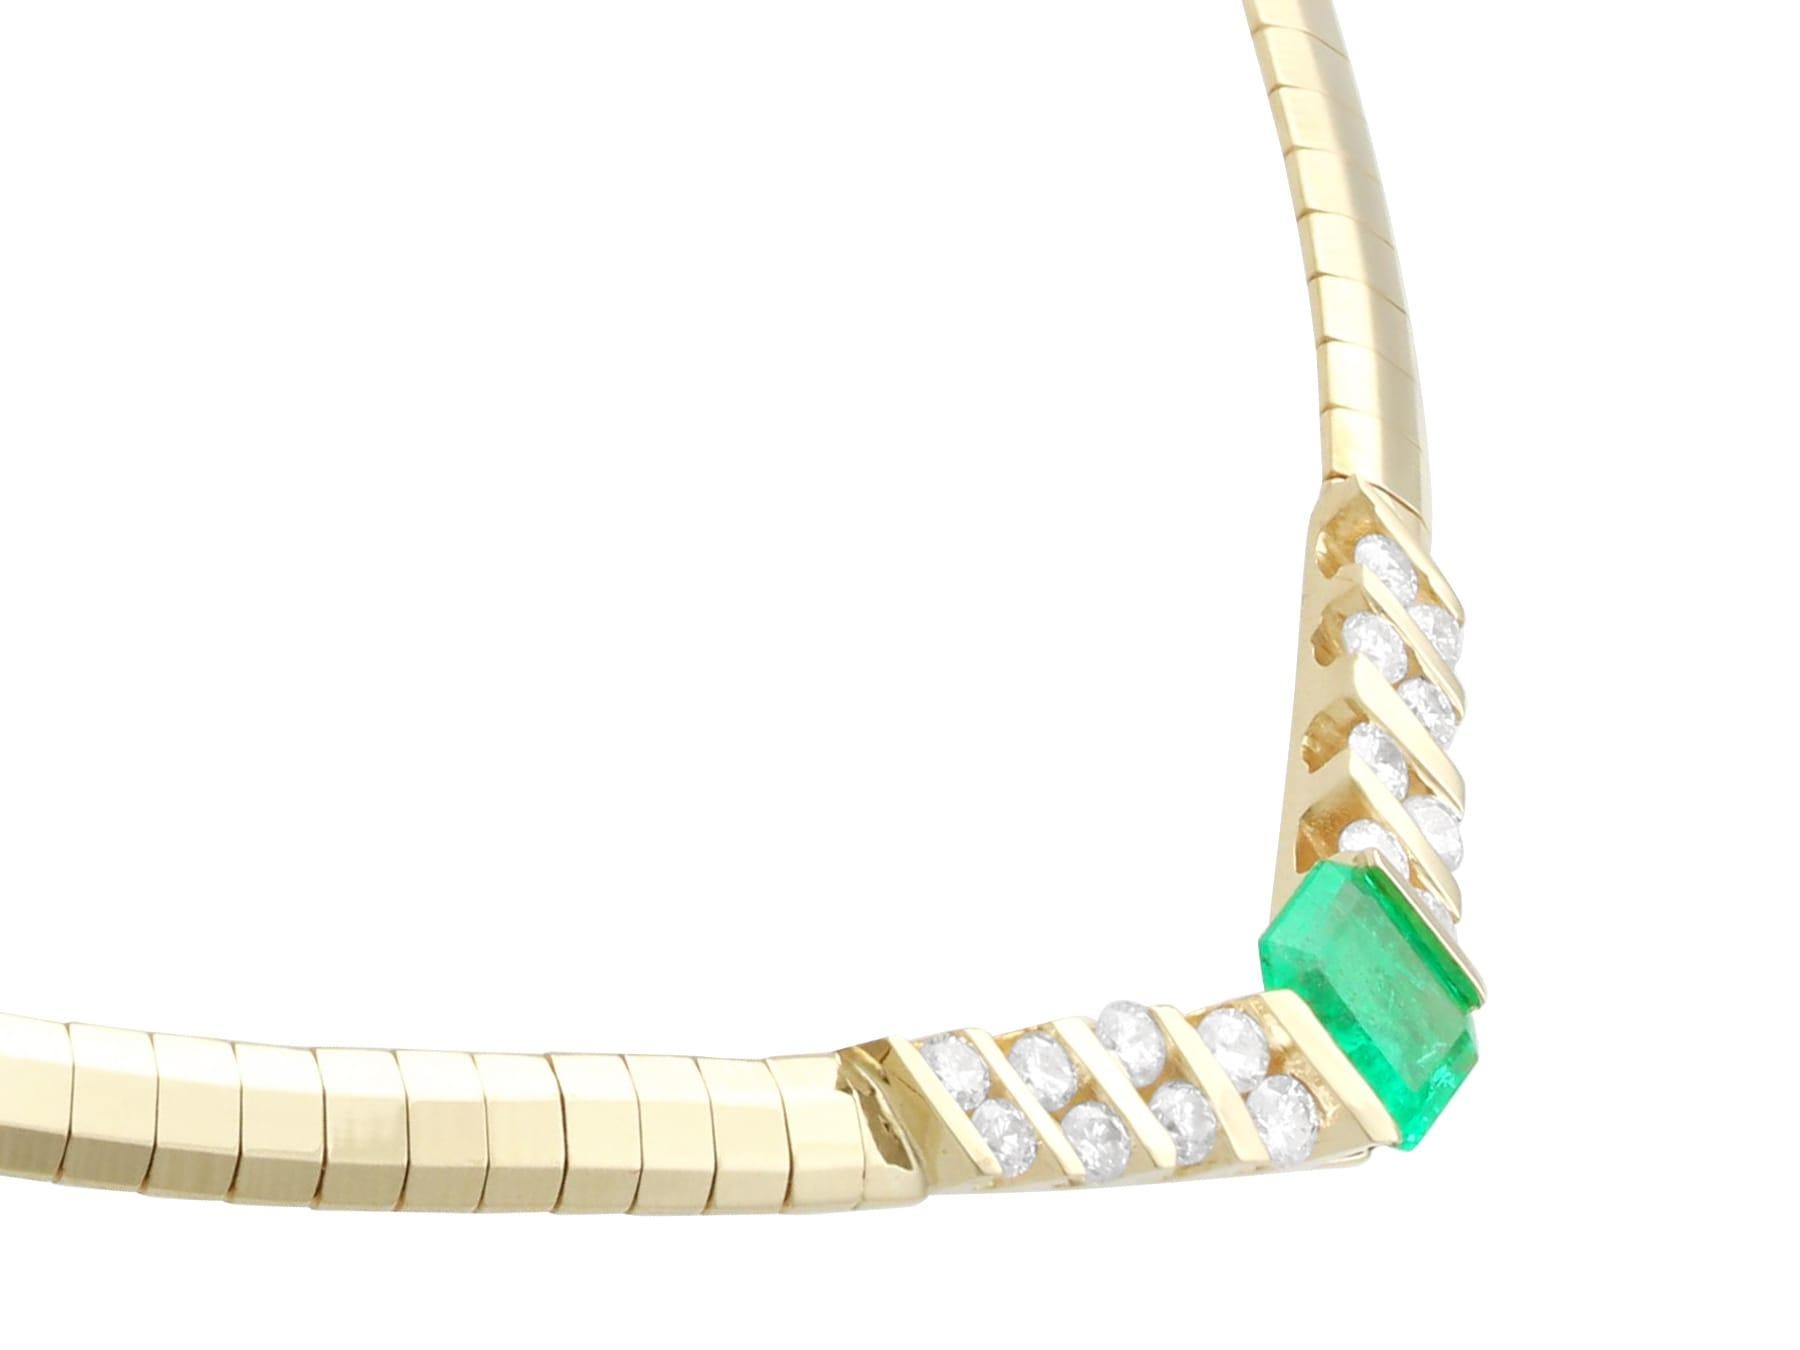 A stunning, fine and impressive vintage 0.95 carat emerald and 0.45 carat diamond, 14 karat yellow gold necklace; part of our diverse necklace collection.

This stunning, fine and impressive vintage necklace has been crafted in 14 karat yellow